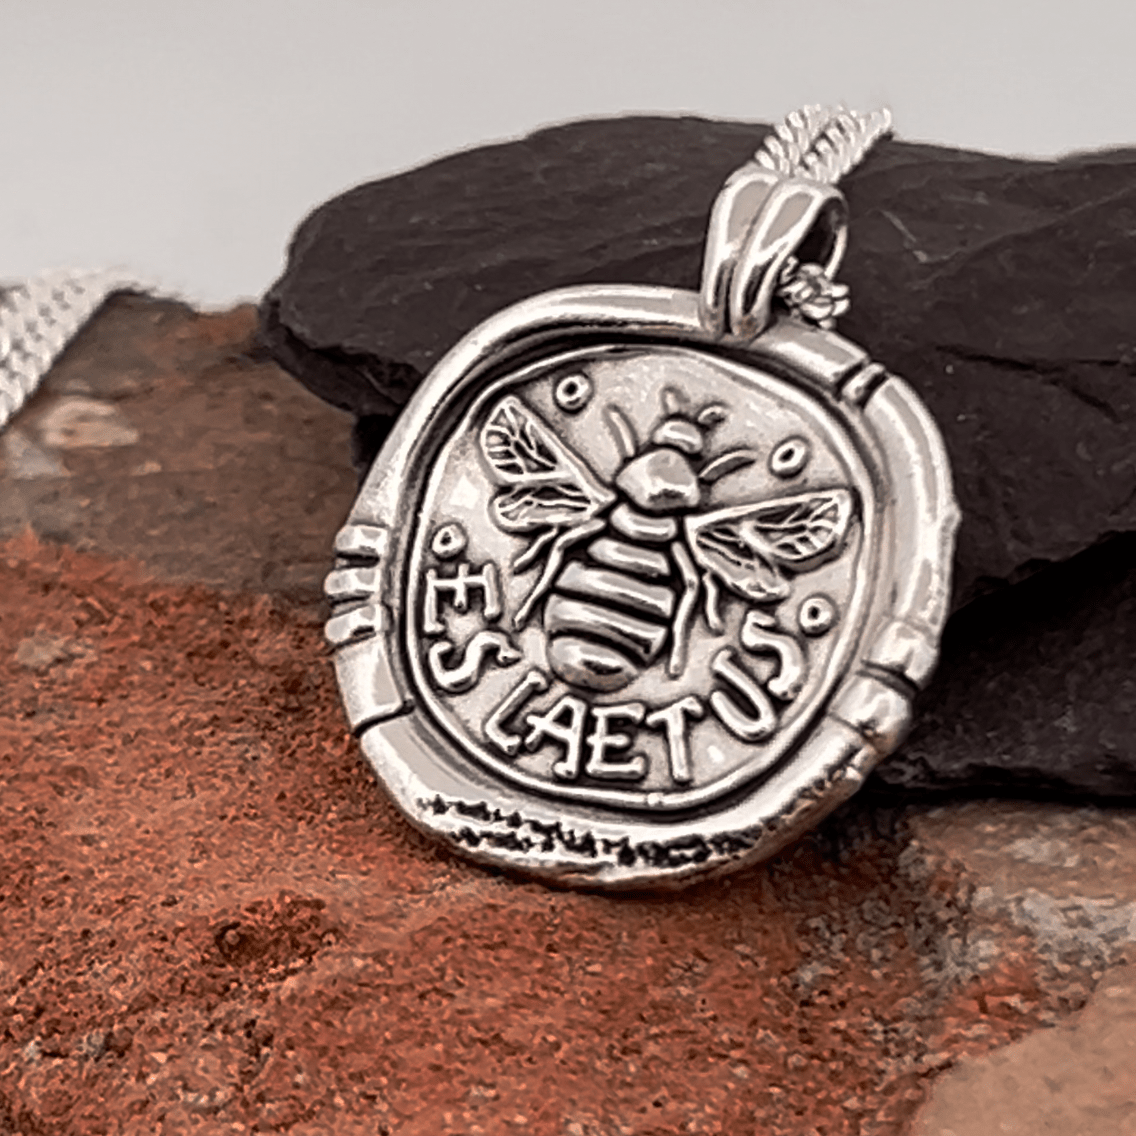 Es Laetus. (Latin: Be Happy) Bee Pendant Necklace by Chris Parry Jewellery